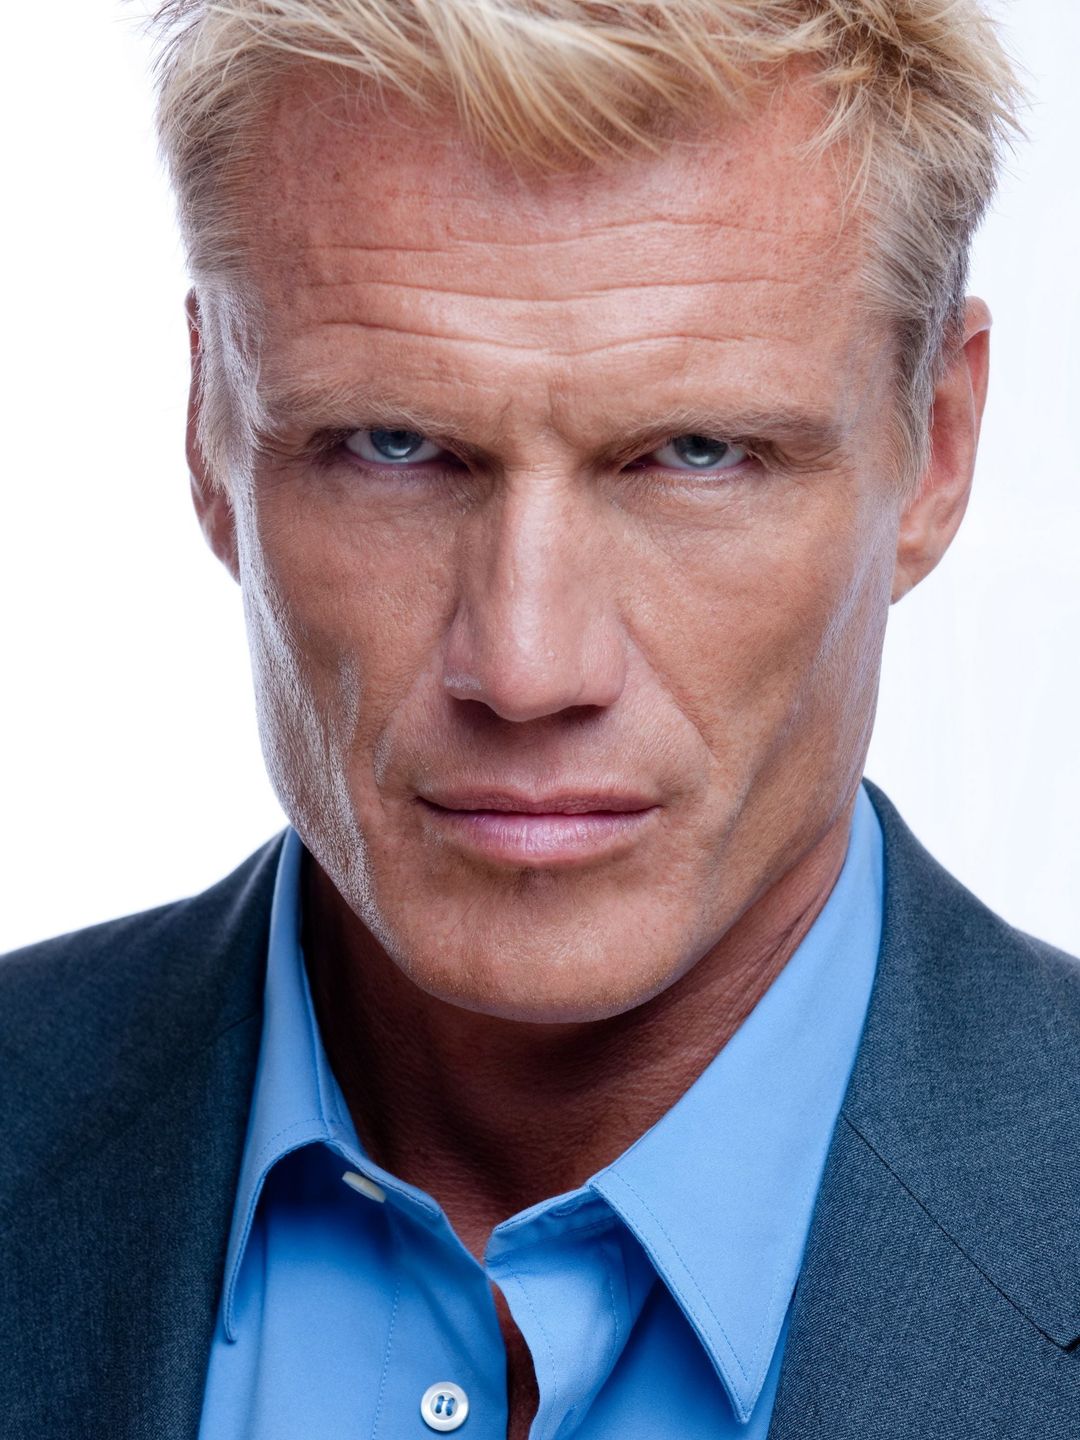 Dolph Lundgren early childhood